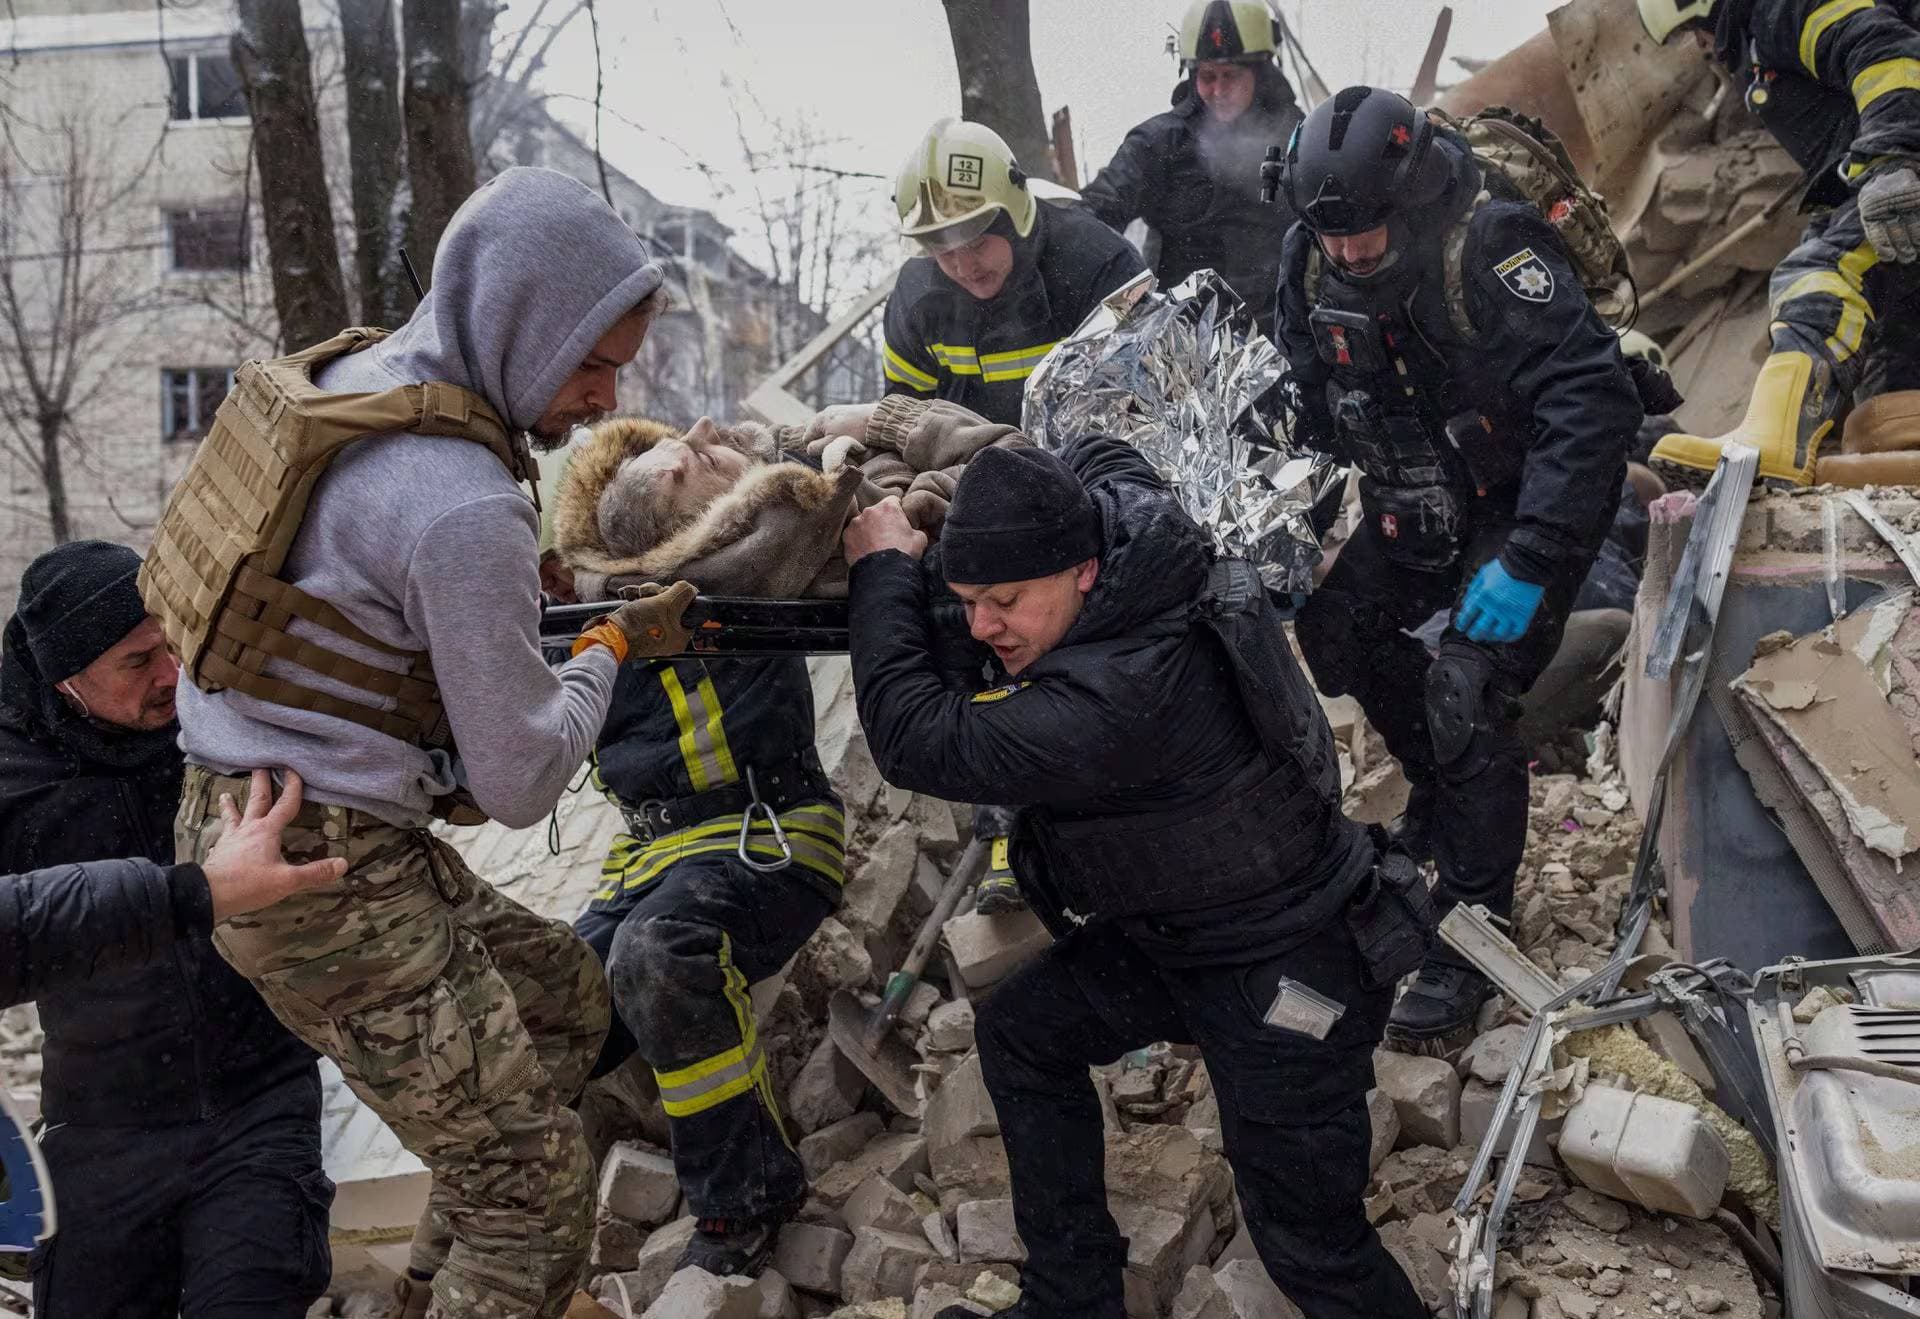 Police evacuate a resident from a residential building heavily damaged during a Russian missile attack in Kharkiv